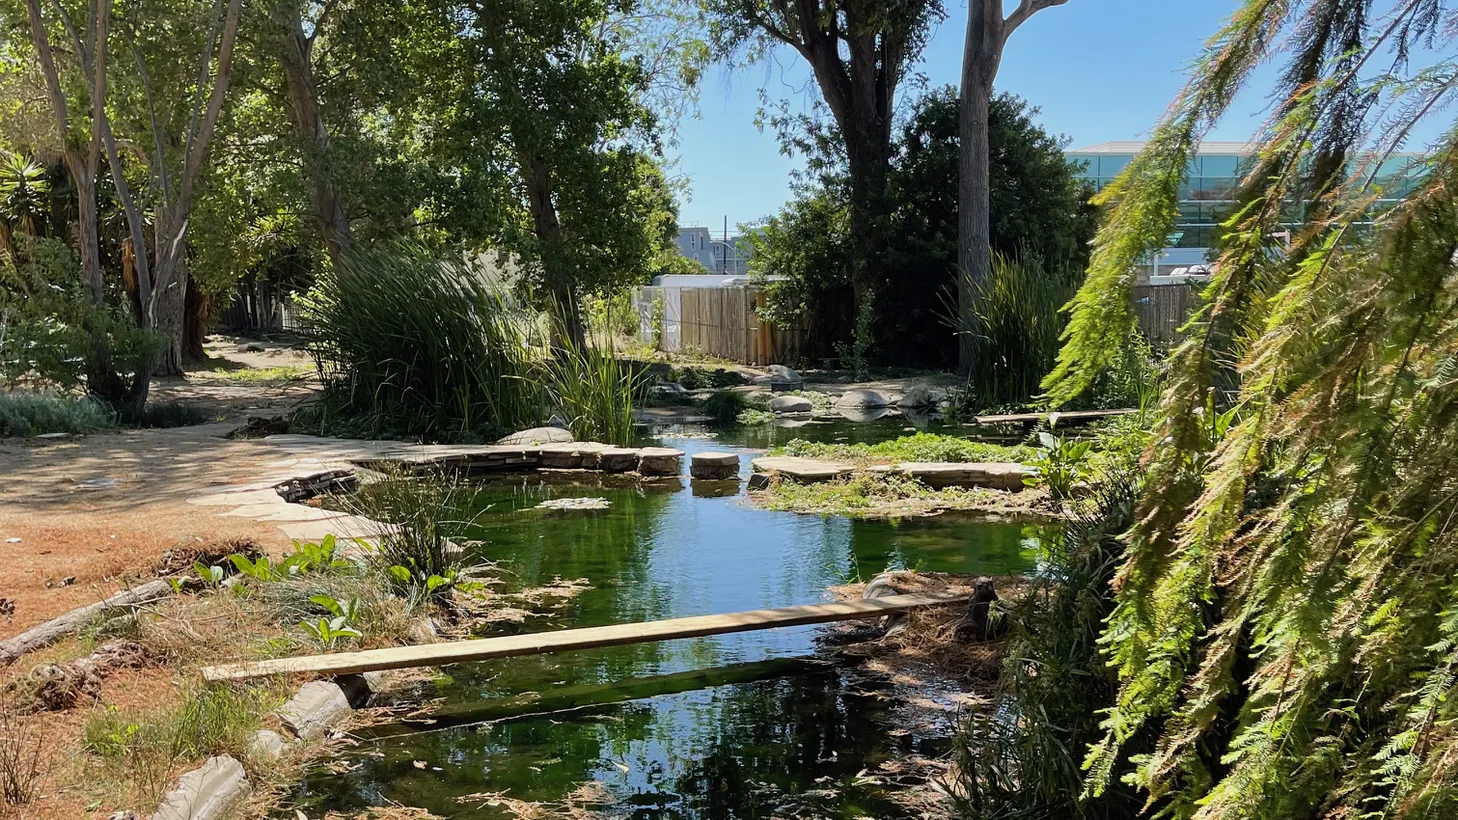 Natural spring water feeds this pond at the Gabrielino/Tongva Sacred Springs Foundation in West LA. It’s on the site of an ancient indigenous village called Kuruvungna.